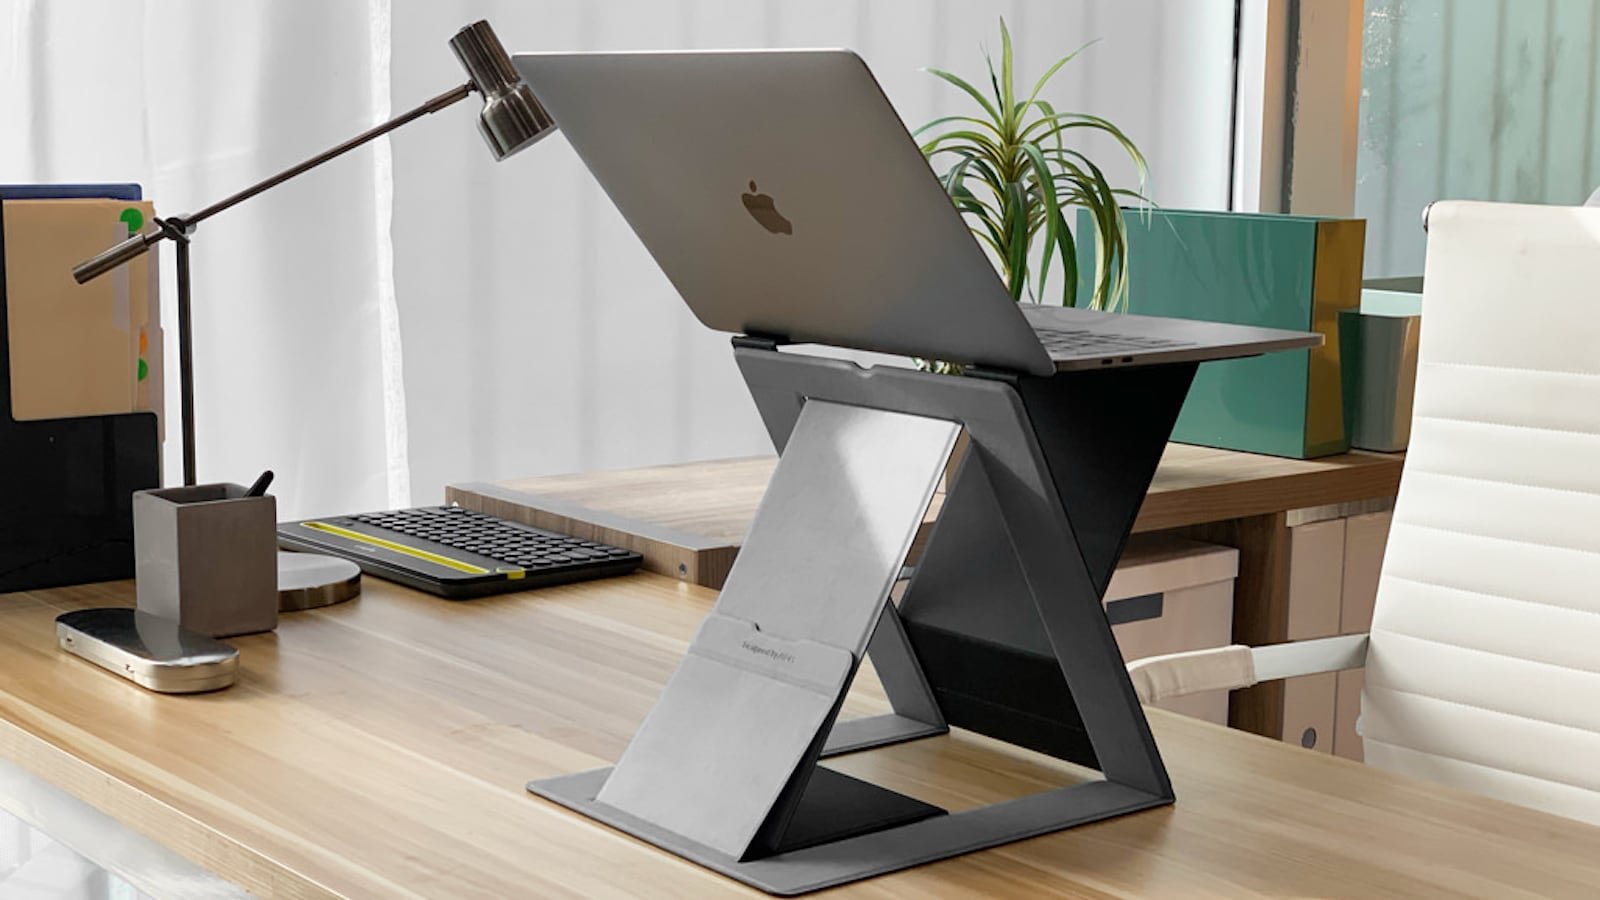 MOFT Z 4-in-1 Invisible Sit-Stand Laptop Desk has an origami-inspired design